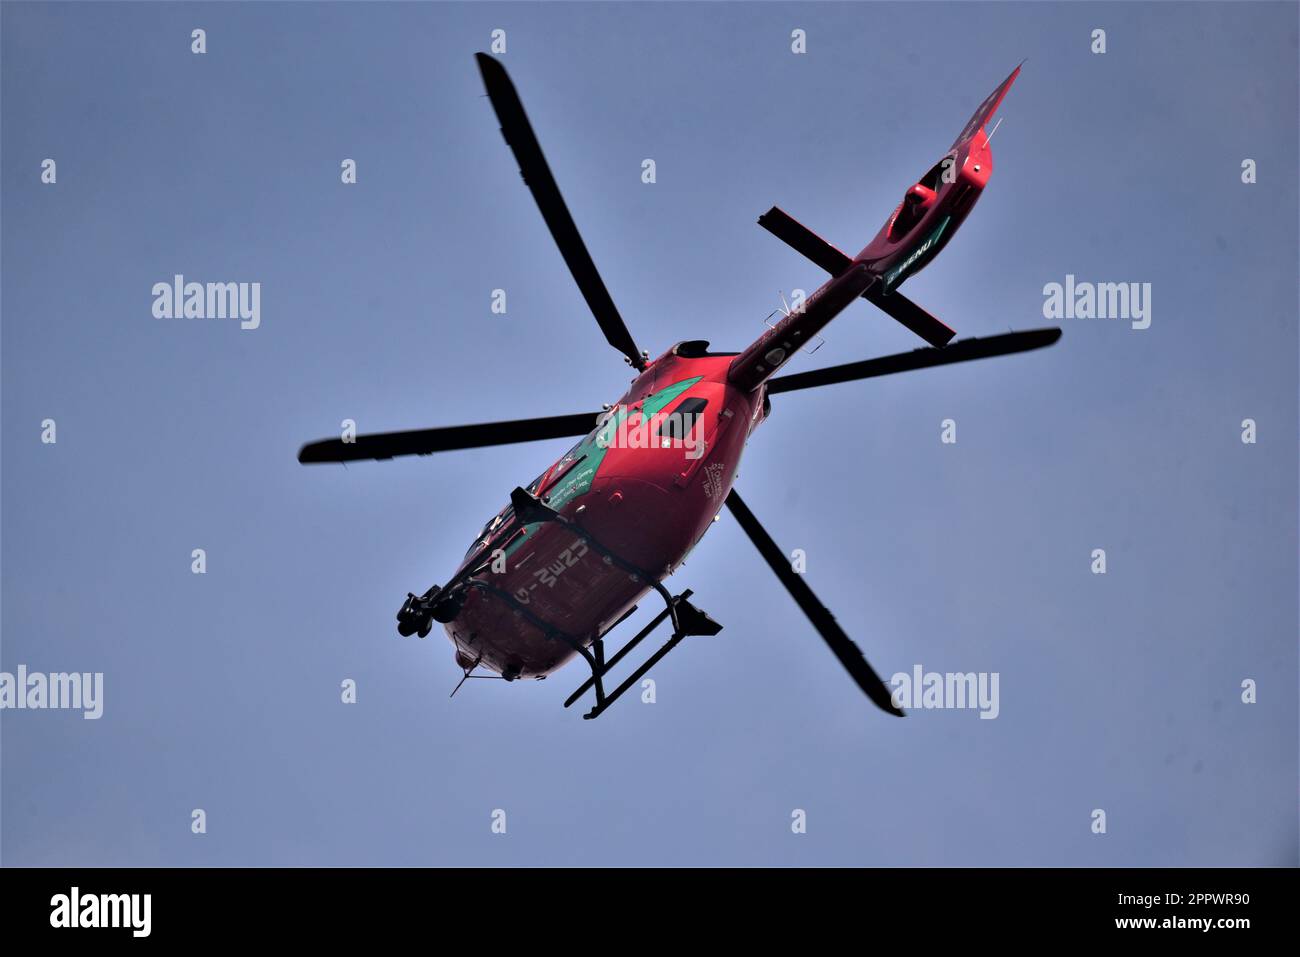 Airbus H145 aircraft a welsh air ambulance helicopter pictured in flight, based at Dafen near Llanelli, Carmarthenshire, callsign Helimed 57. Stock Photo